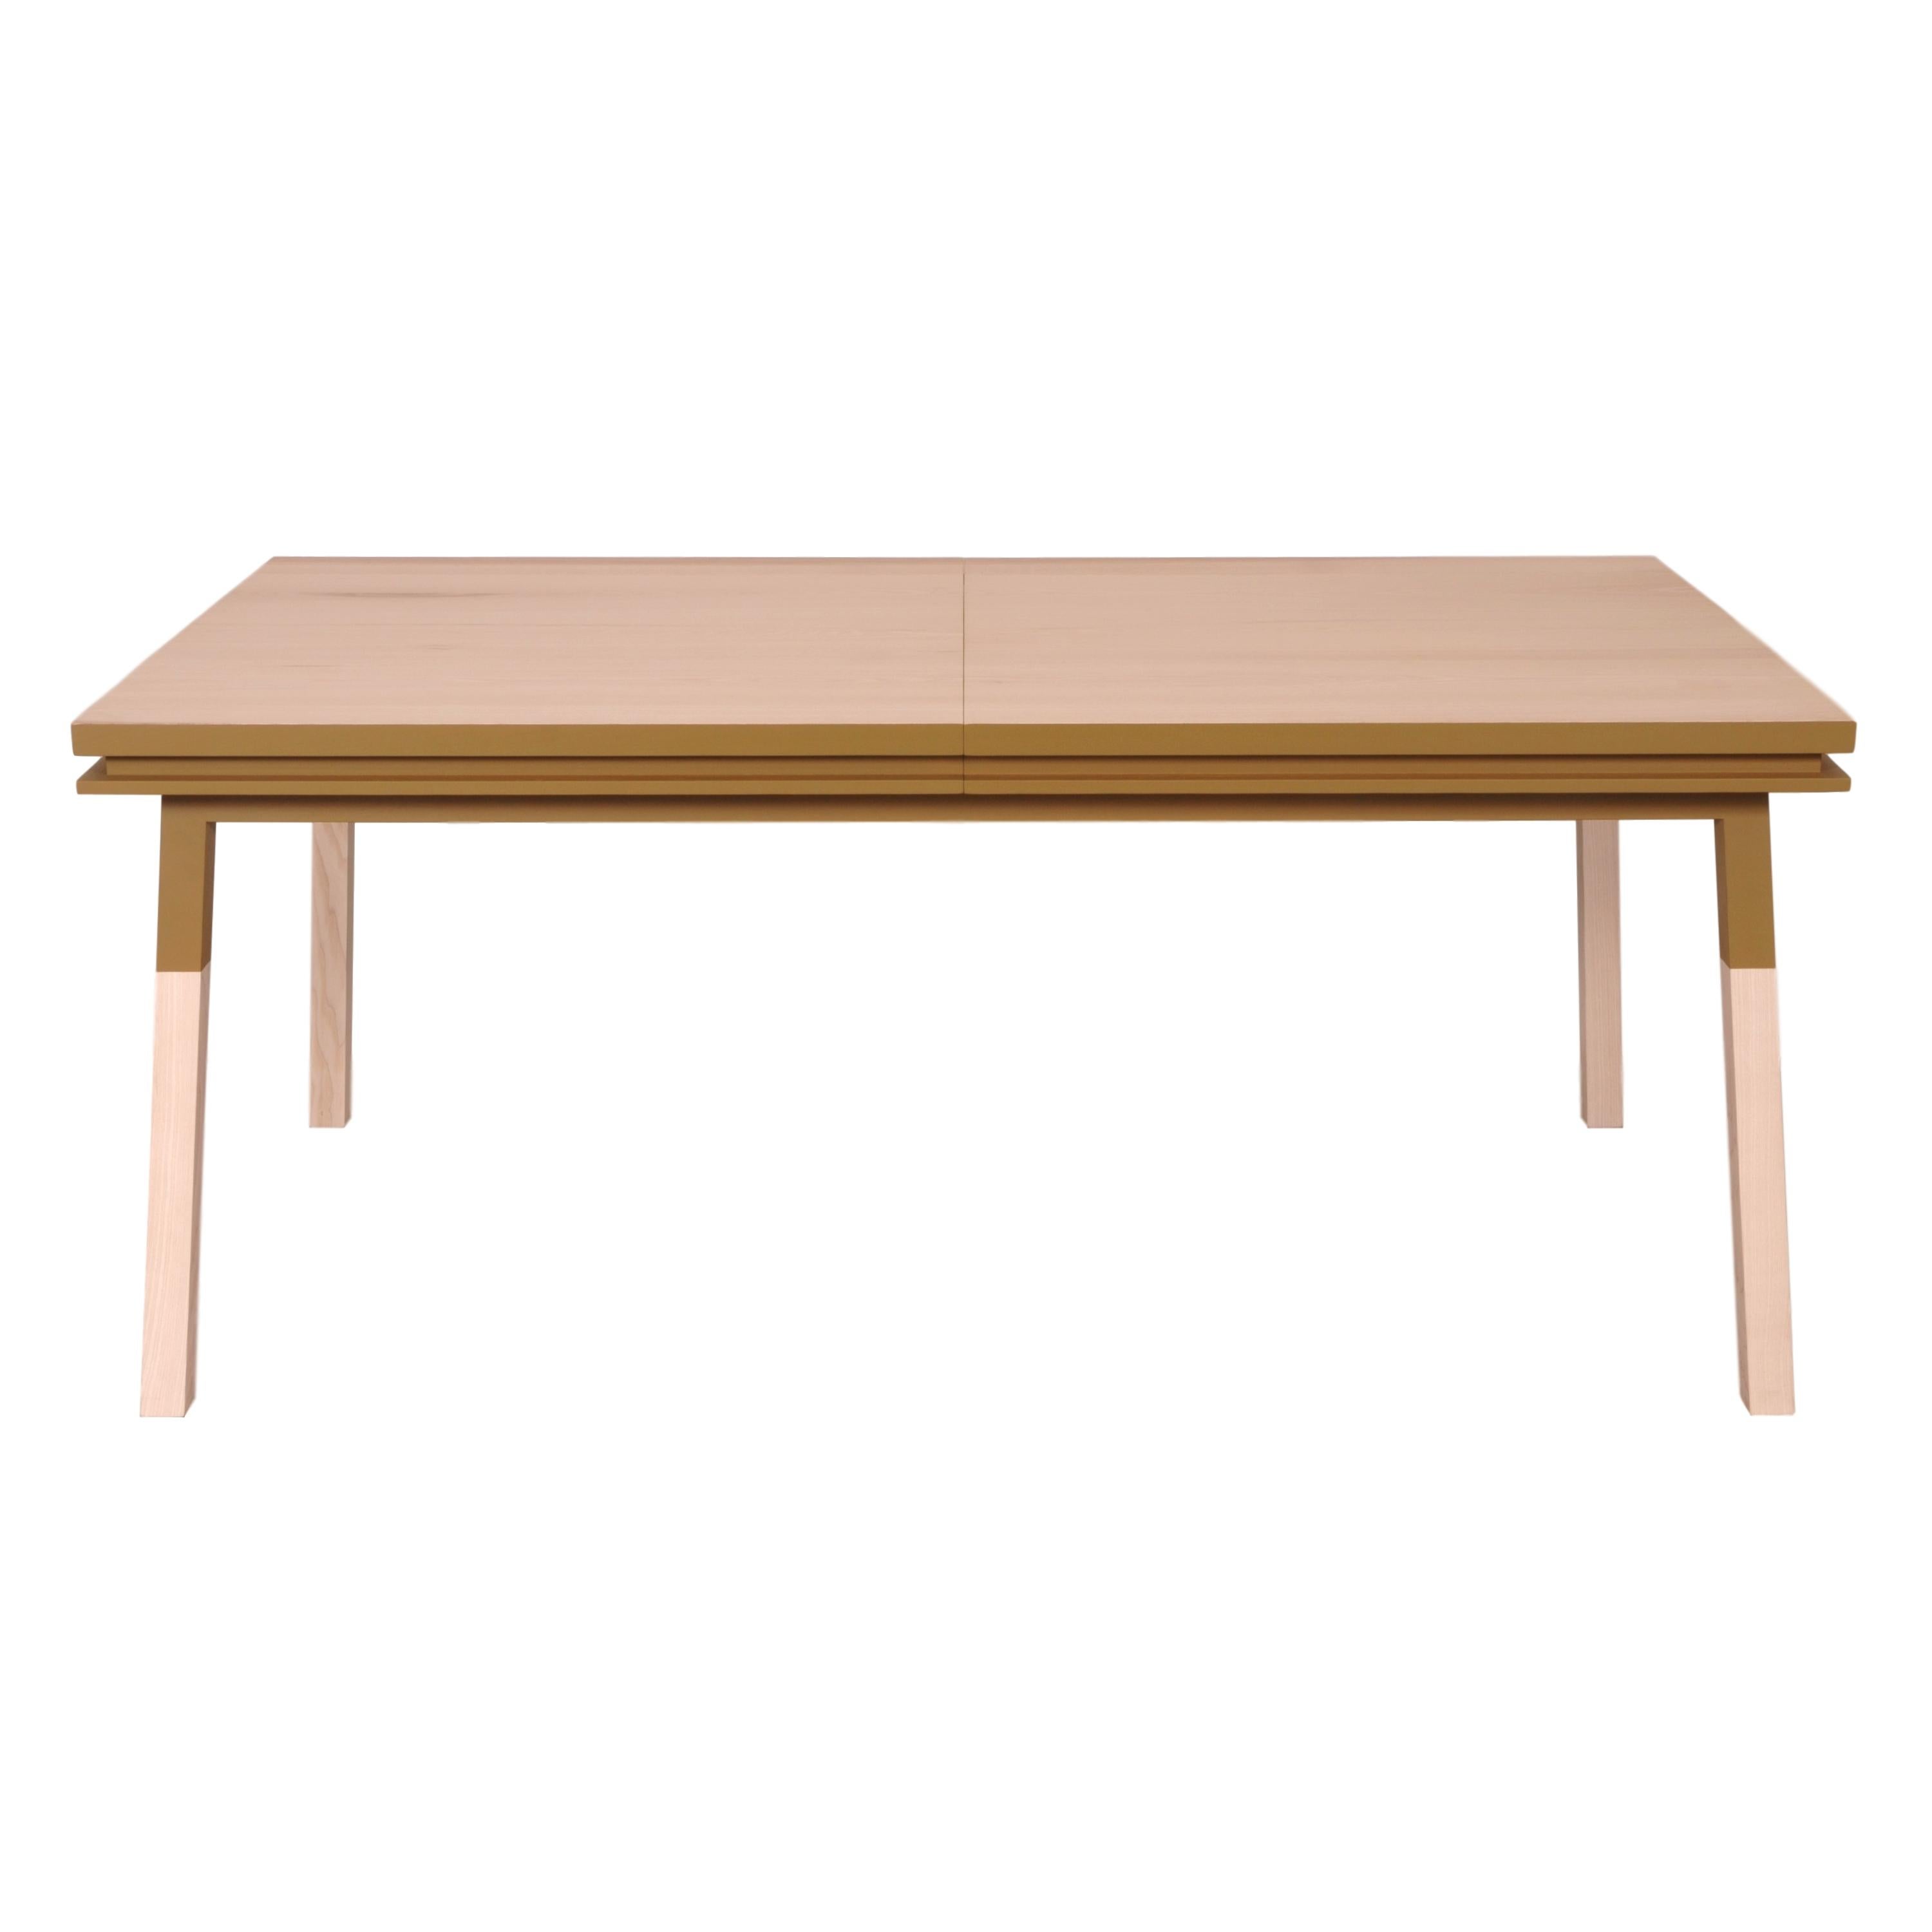 Hand-Crafted Extensible Dining Table in Solid Wood, Scandinavian Design by E. Gizard, Paris For Sale